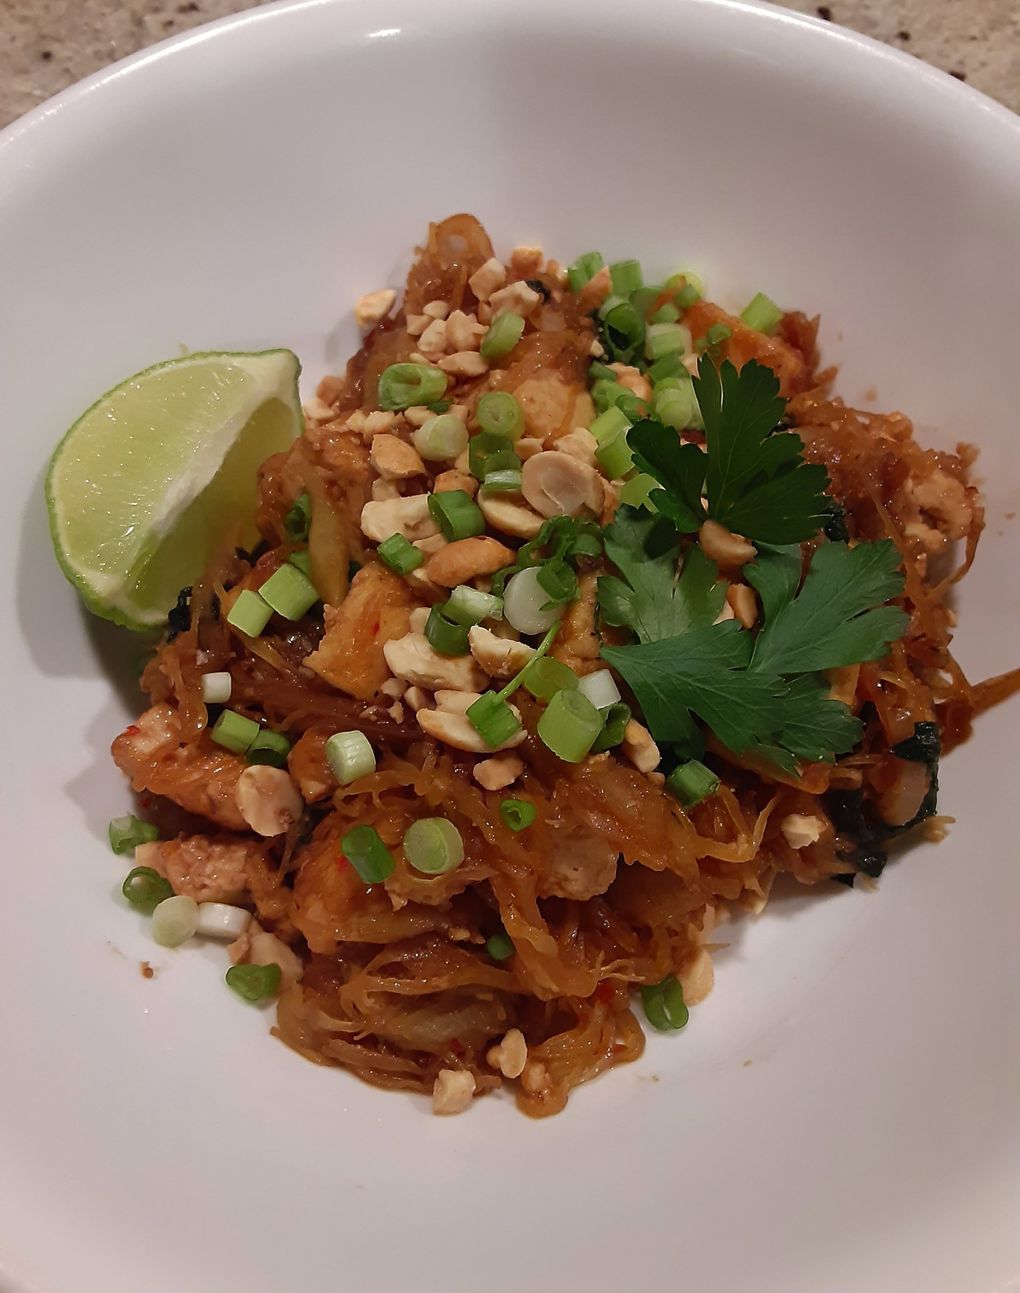 Beth Cavalli’s secret ingredient was Jarritos tamarind soda — it transformed her dish into one of Asian flavors that went beyond what you’d normally think possible with apples and squash. (Courtesy of Beth Cavalli)